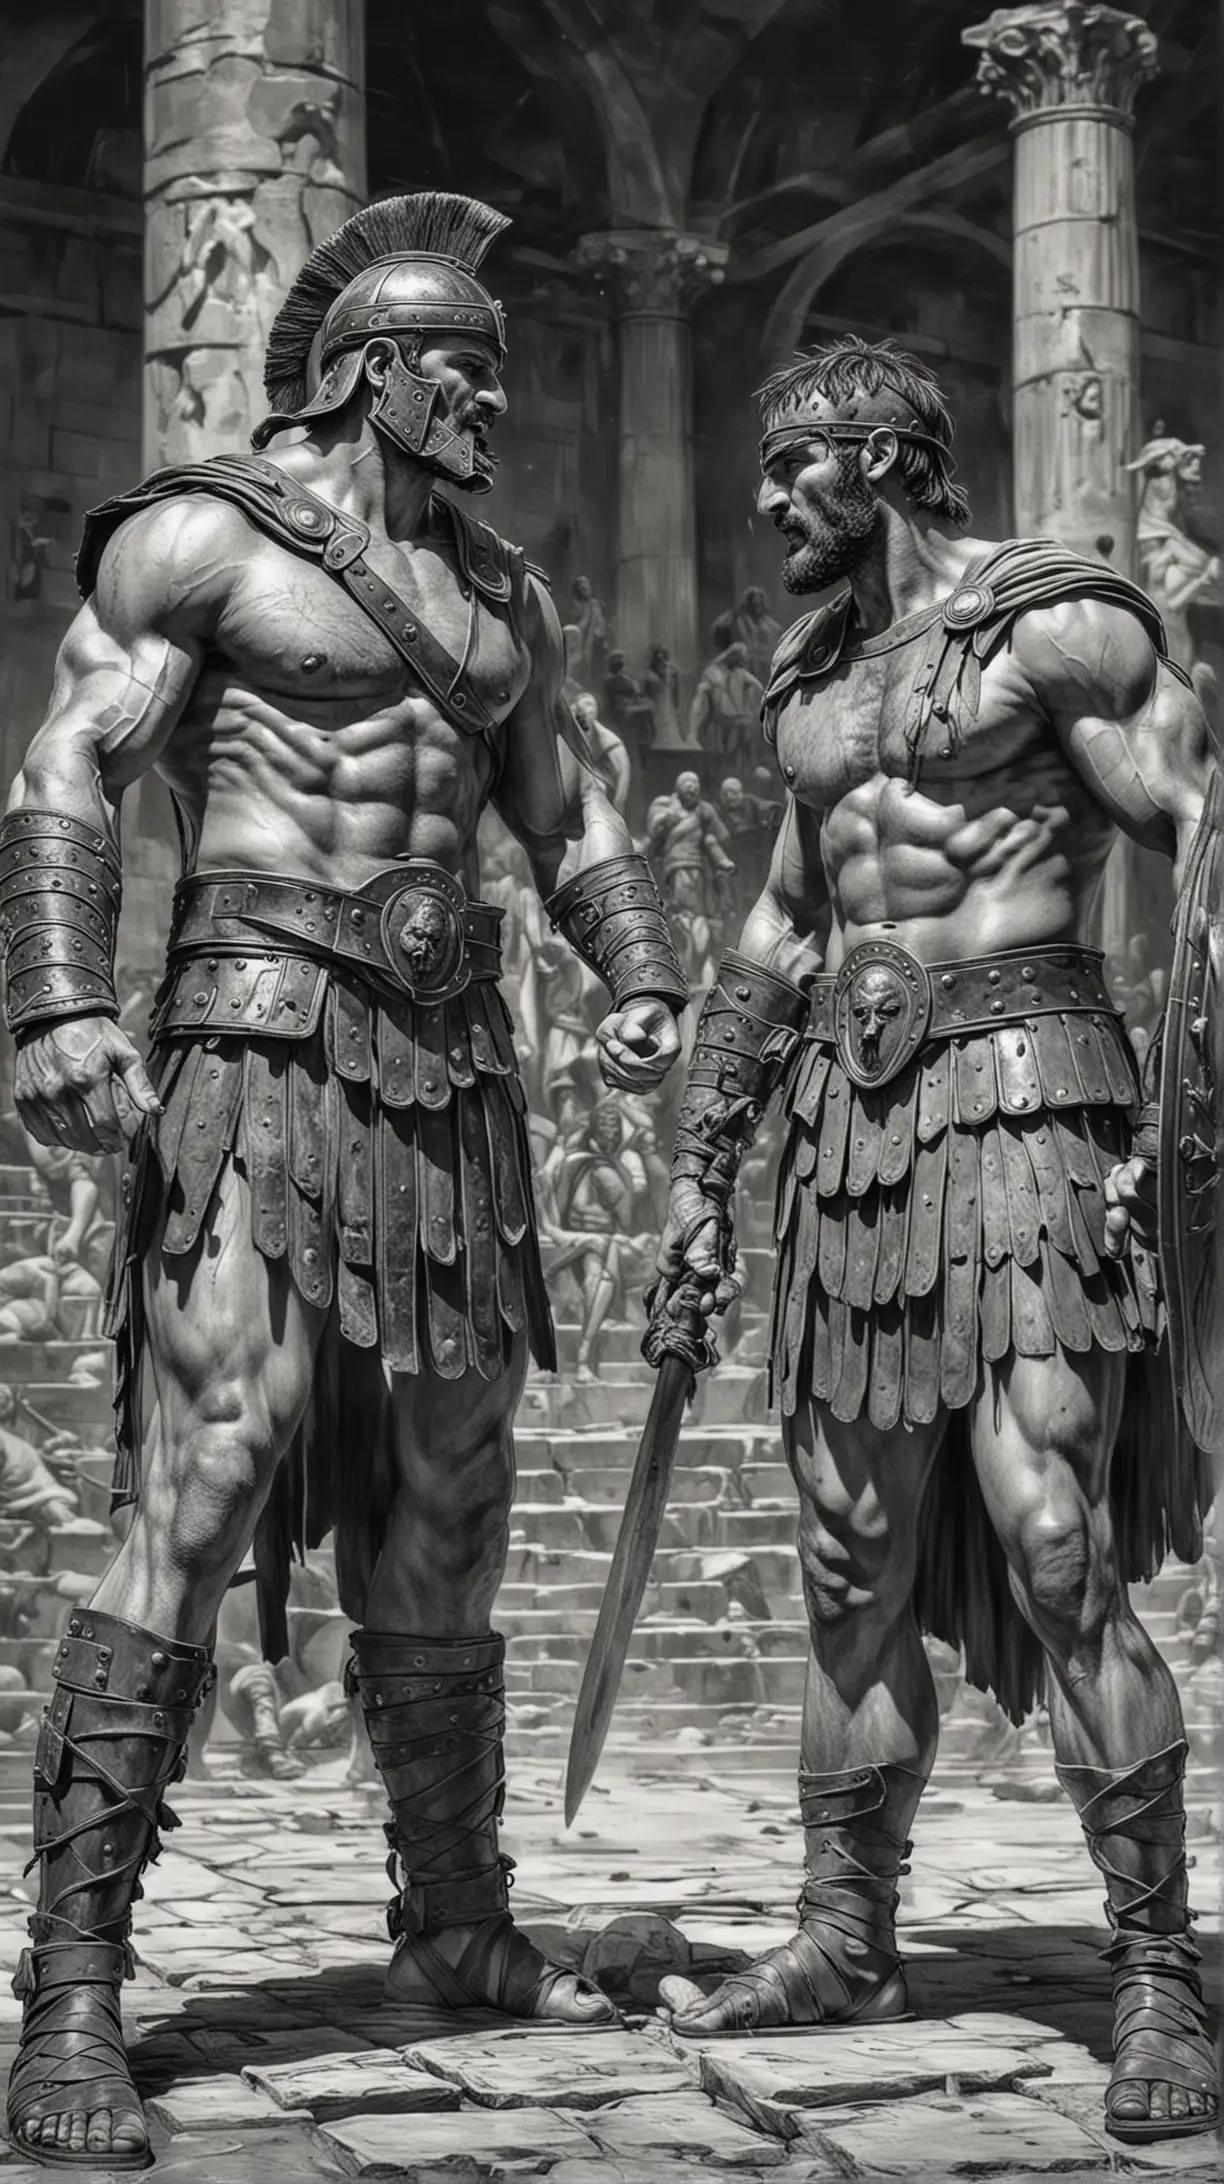 Ancient Roman Gladiator Dueling Massive Barbarian in Colosseum Arena Sketch